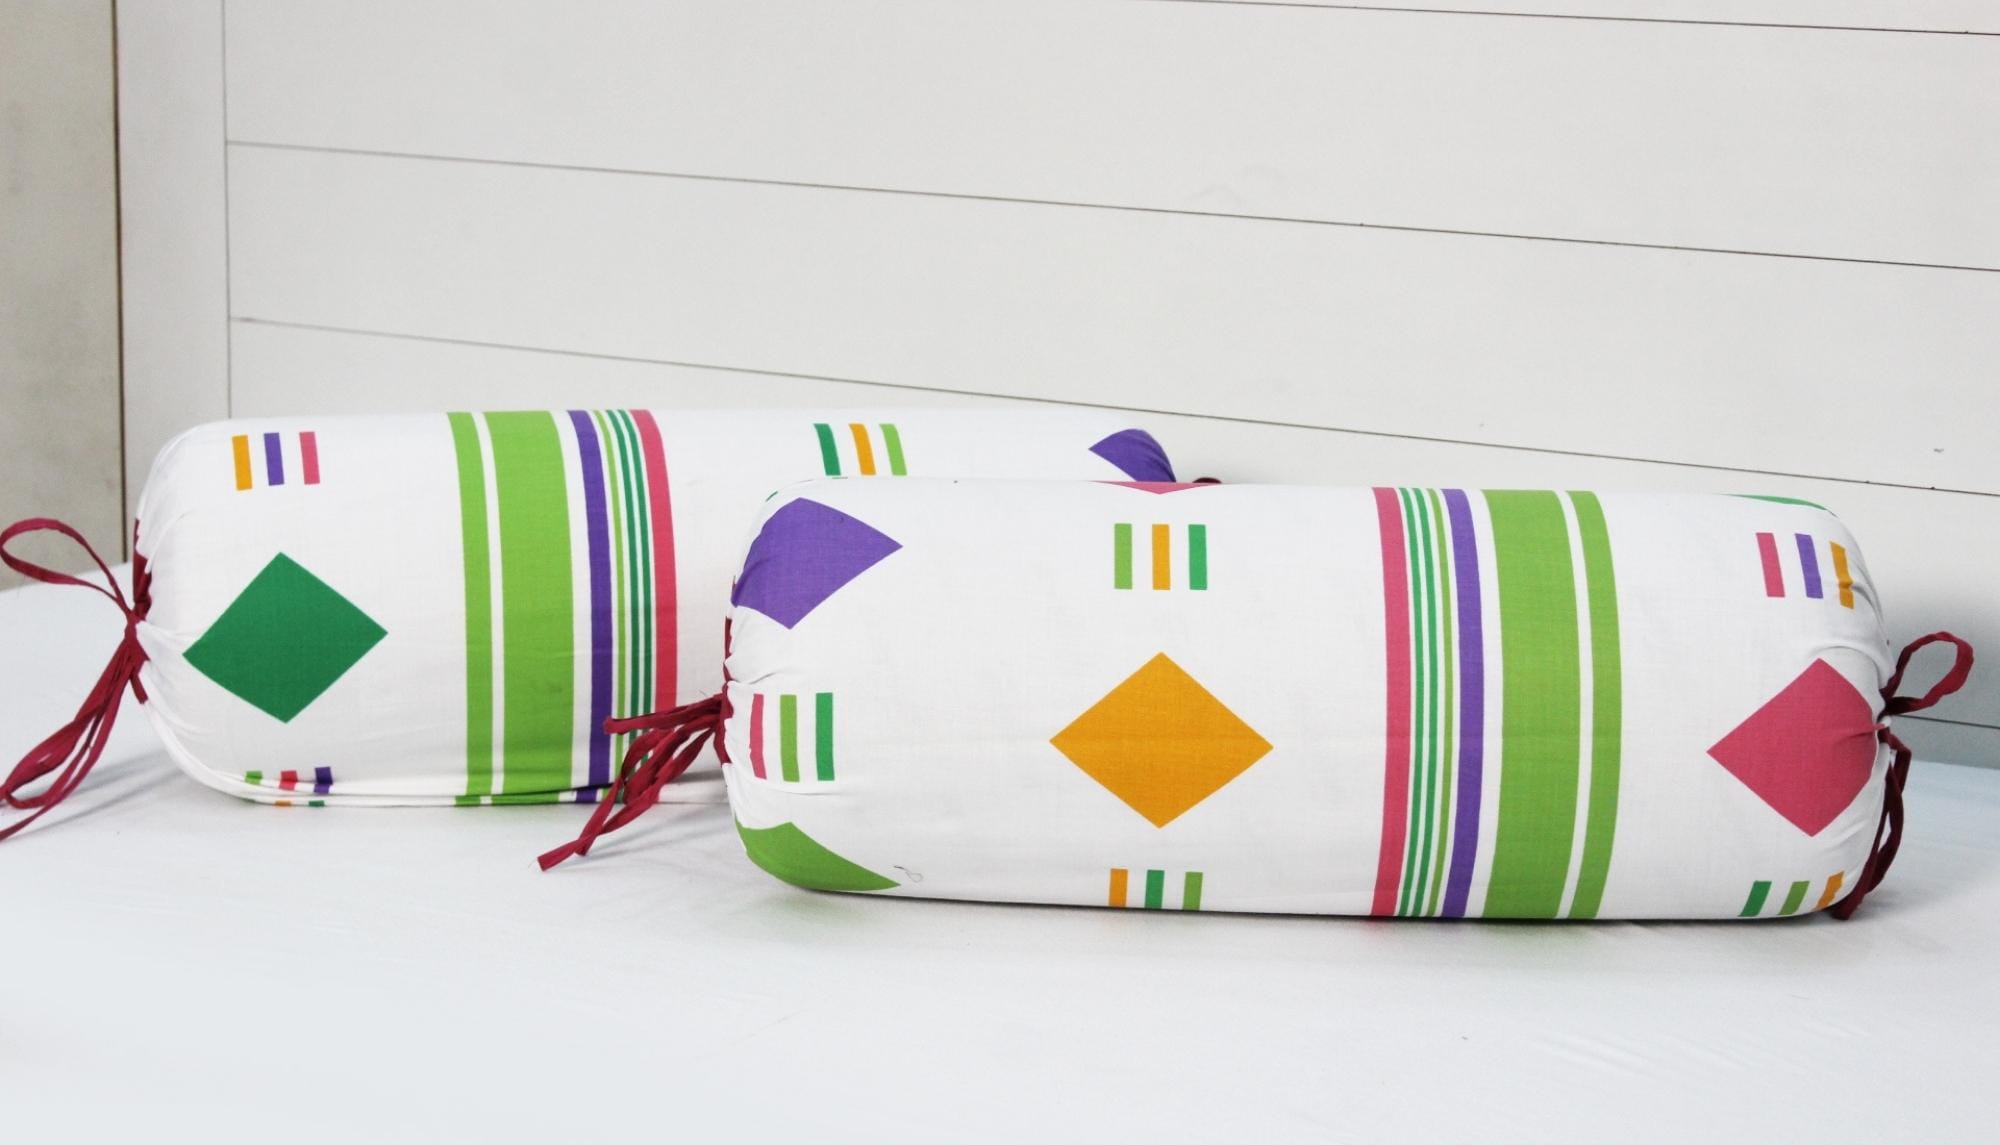 Printed Multicolor Funky Cotton 2 Pcs Bolster Cover set - Green